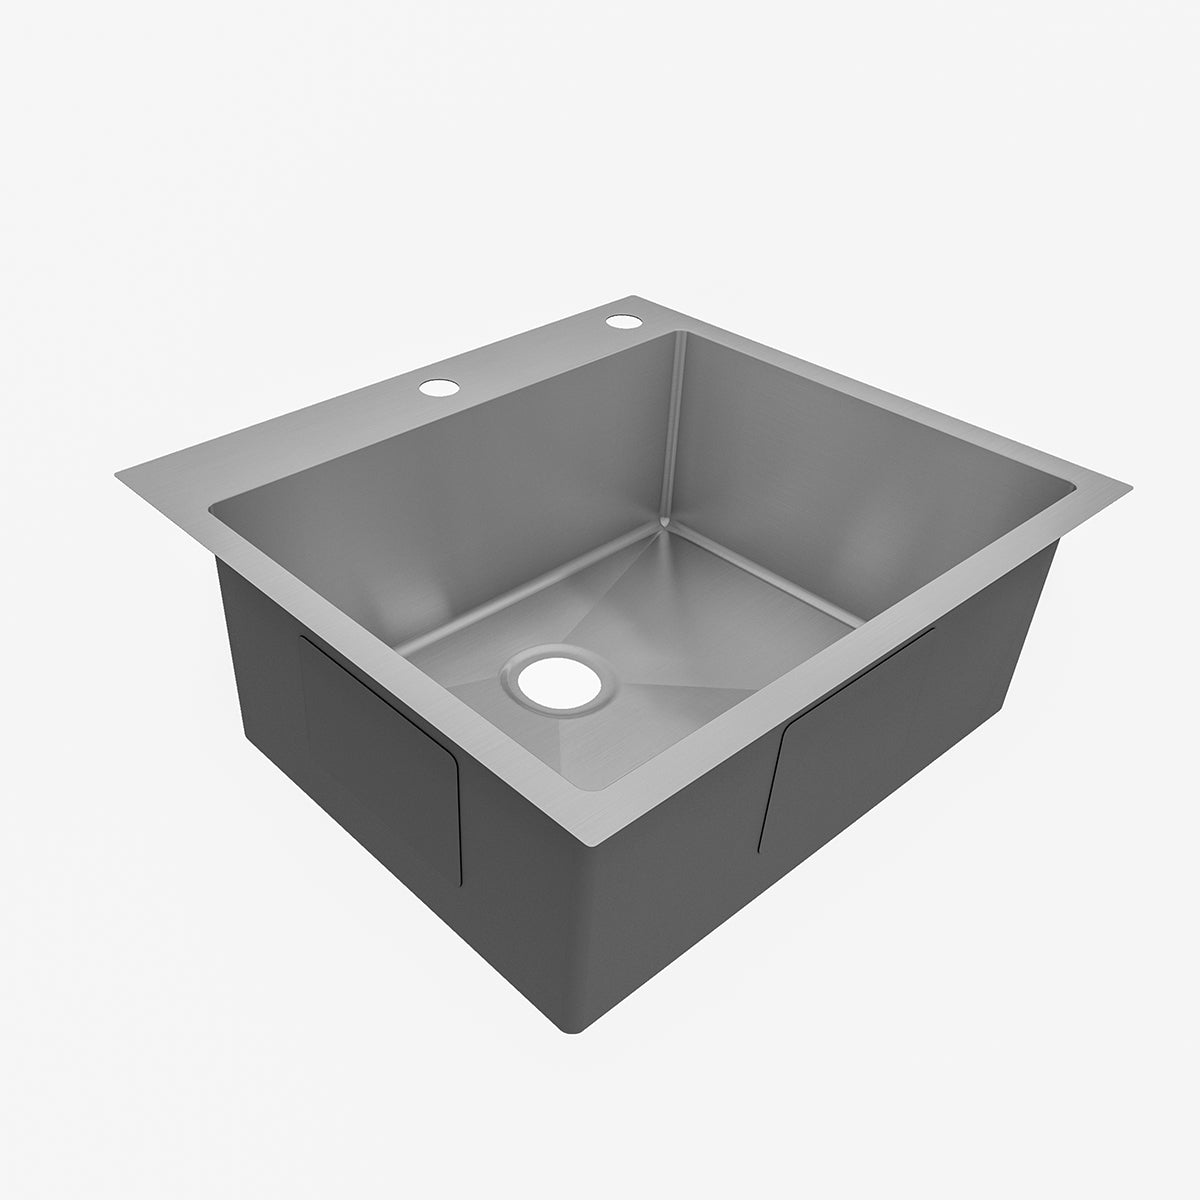 Sinber 25" x 22" x 9" Drop In Single Bowl Kitchen Sink with 18 Gauge 304 Stainless Steel Satin Finish HT2522S-9-S (Sink Only)